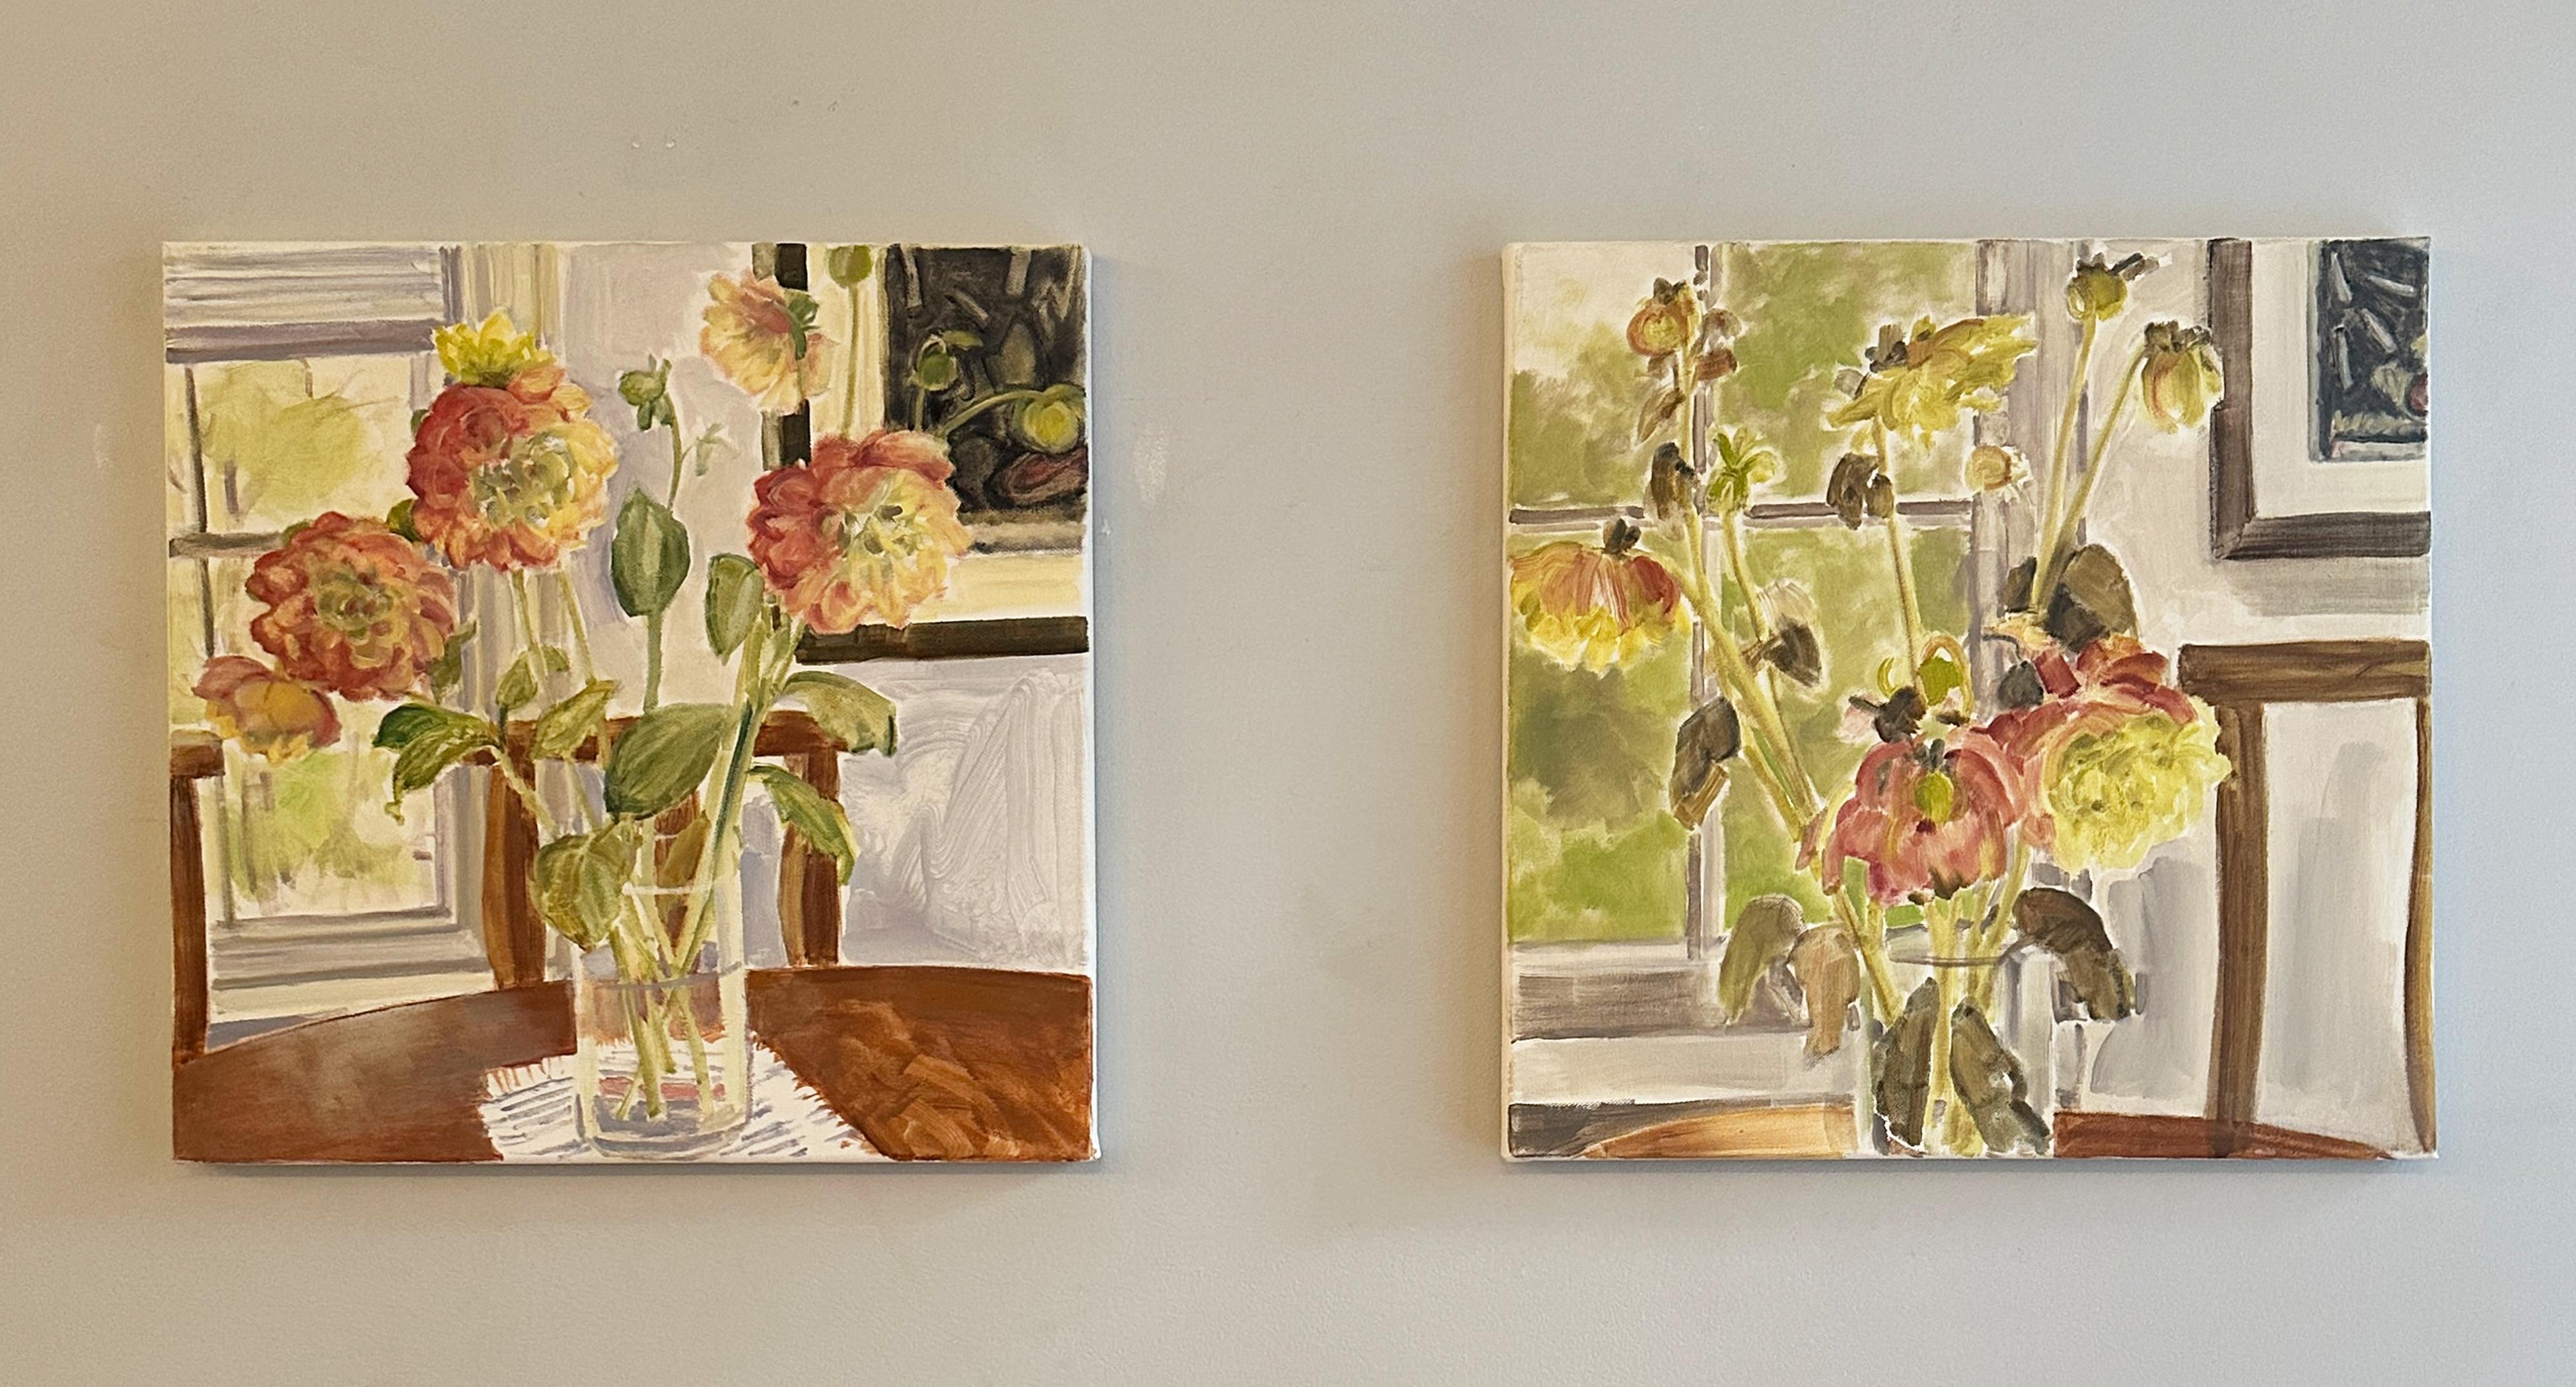 Craddock’s floral paintings are loci for memory, spanning more than a decade and various dwellings. Sharing a kindred spirit with such artists as Jane Freilicher and Lois Dodd, Craddock uses the still life genre to hint at an autobiographical